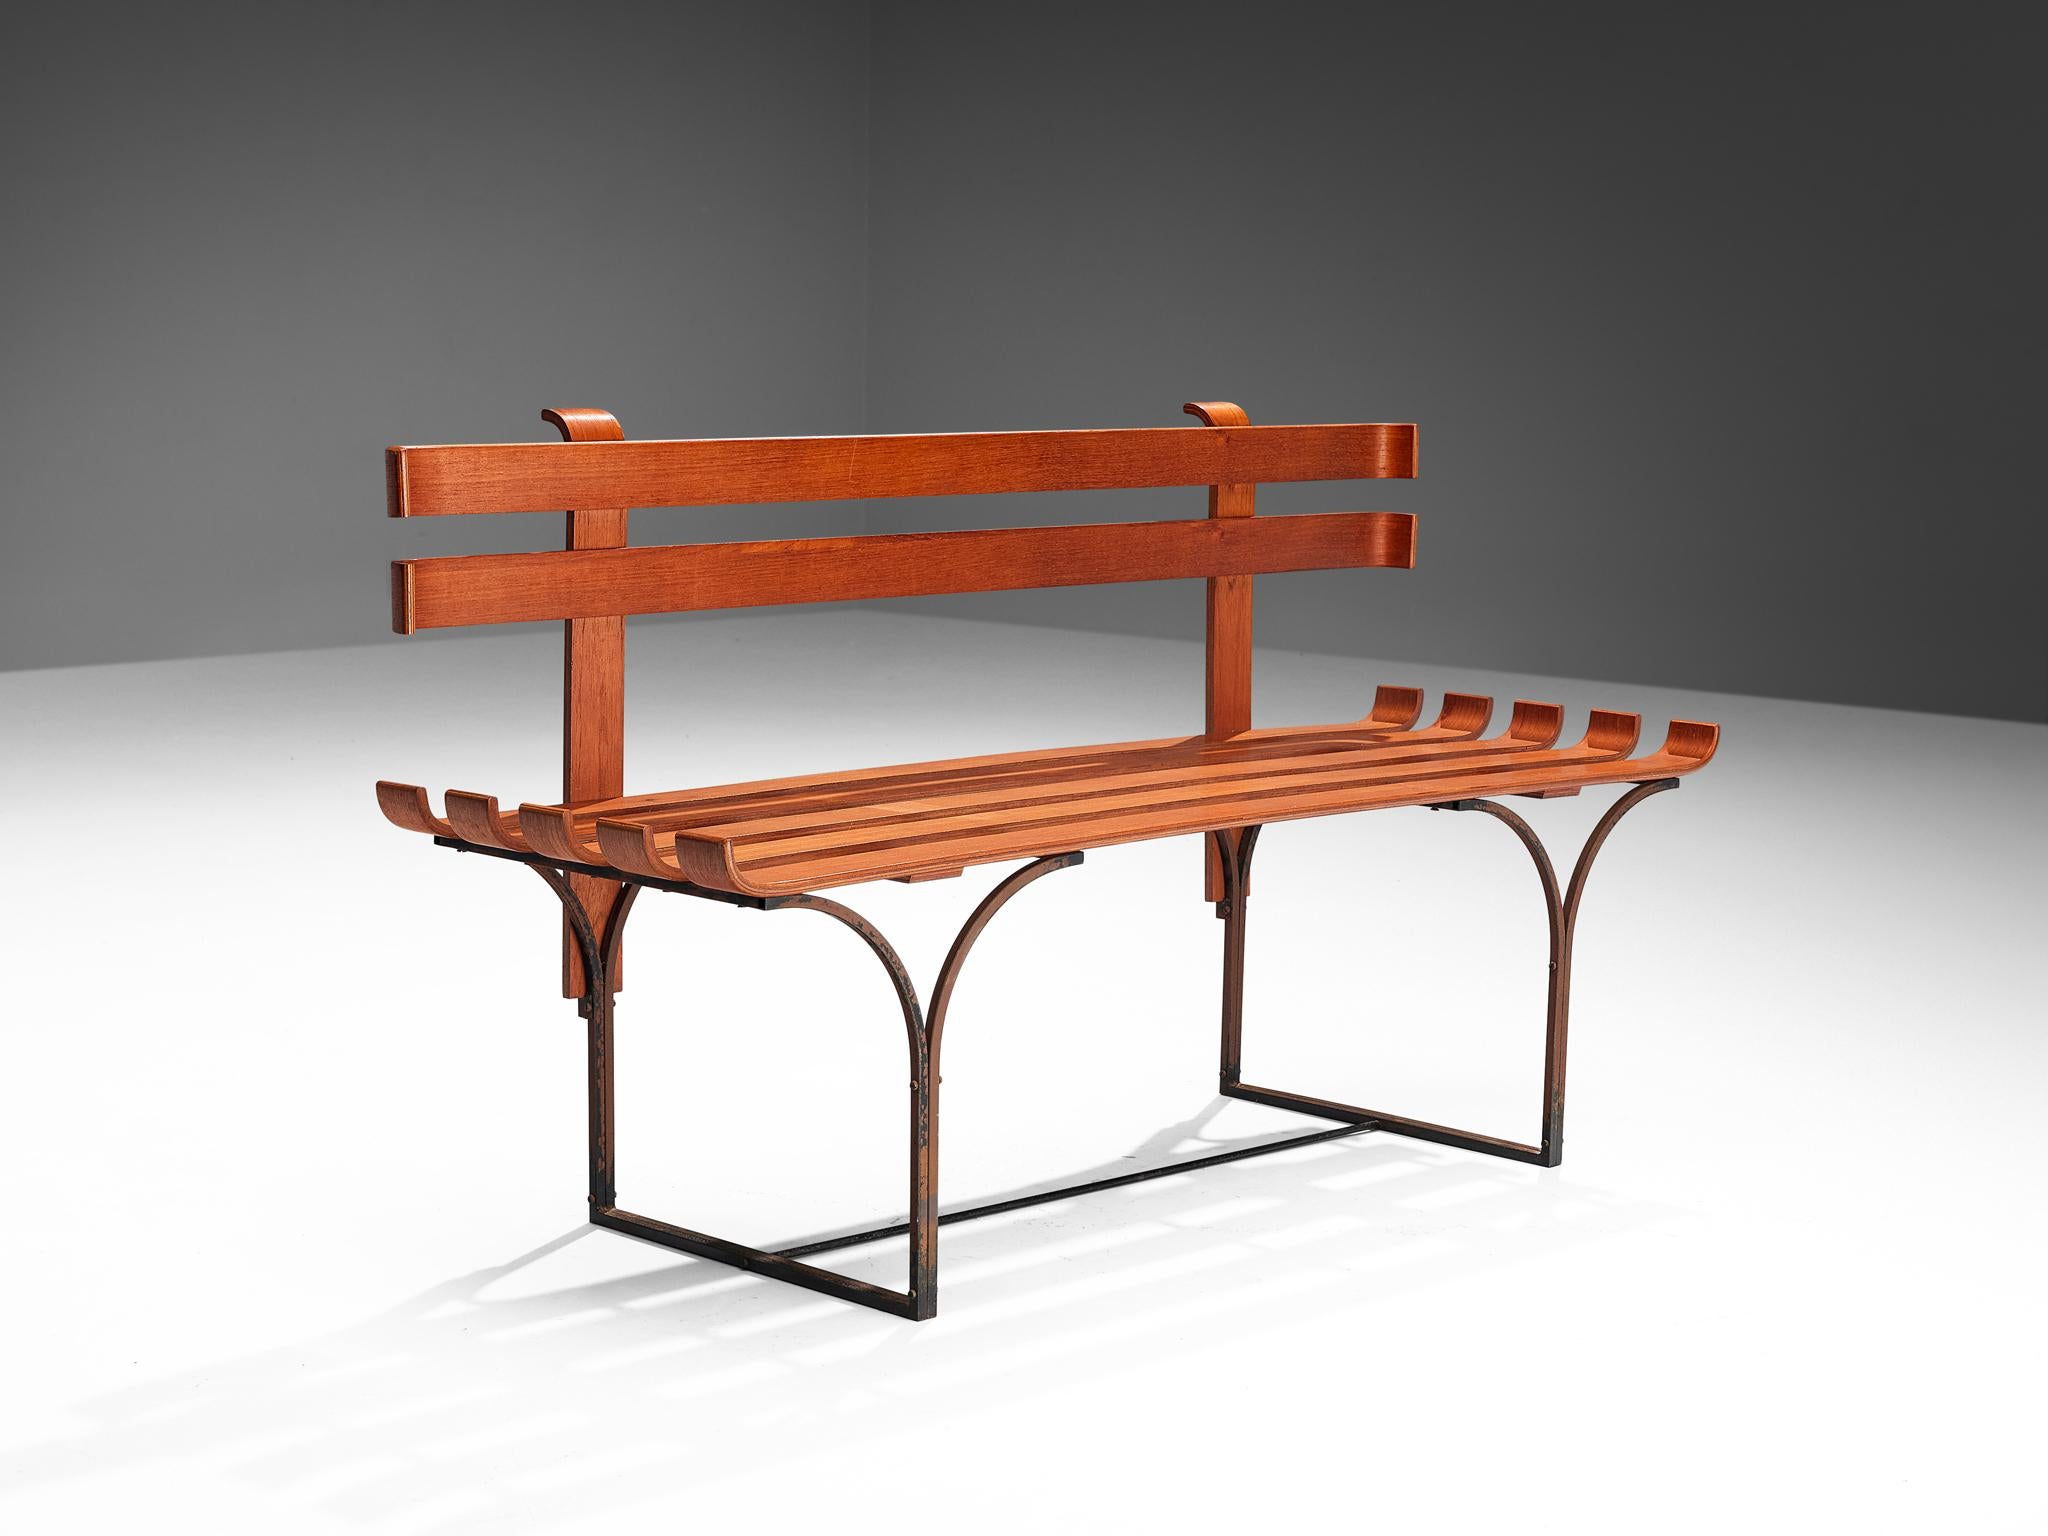 Bench, plywood, metal, Italy, 1960s

This bent plywood bench represents characteristic Italian design elements such as the playful lines of the bent frame and the typical basic design of the plywood. The overall effect of the bench is decidedly